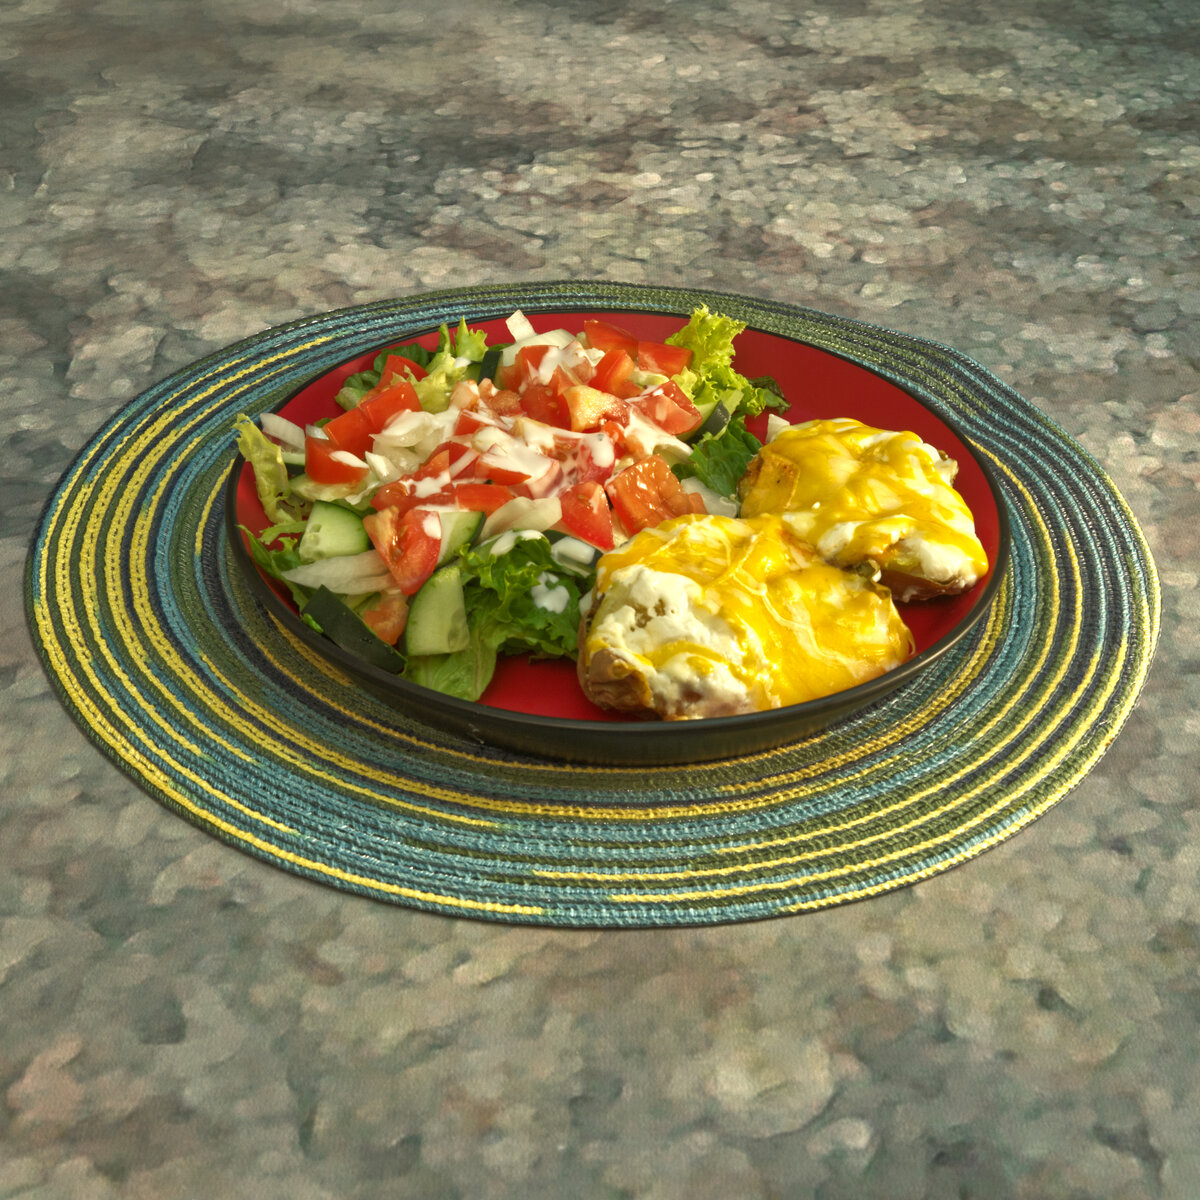 Baked Potato with a Simple Salad